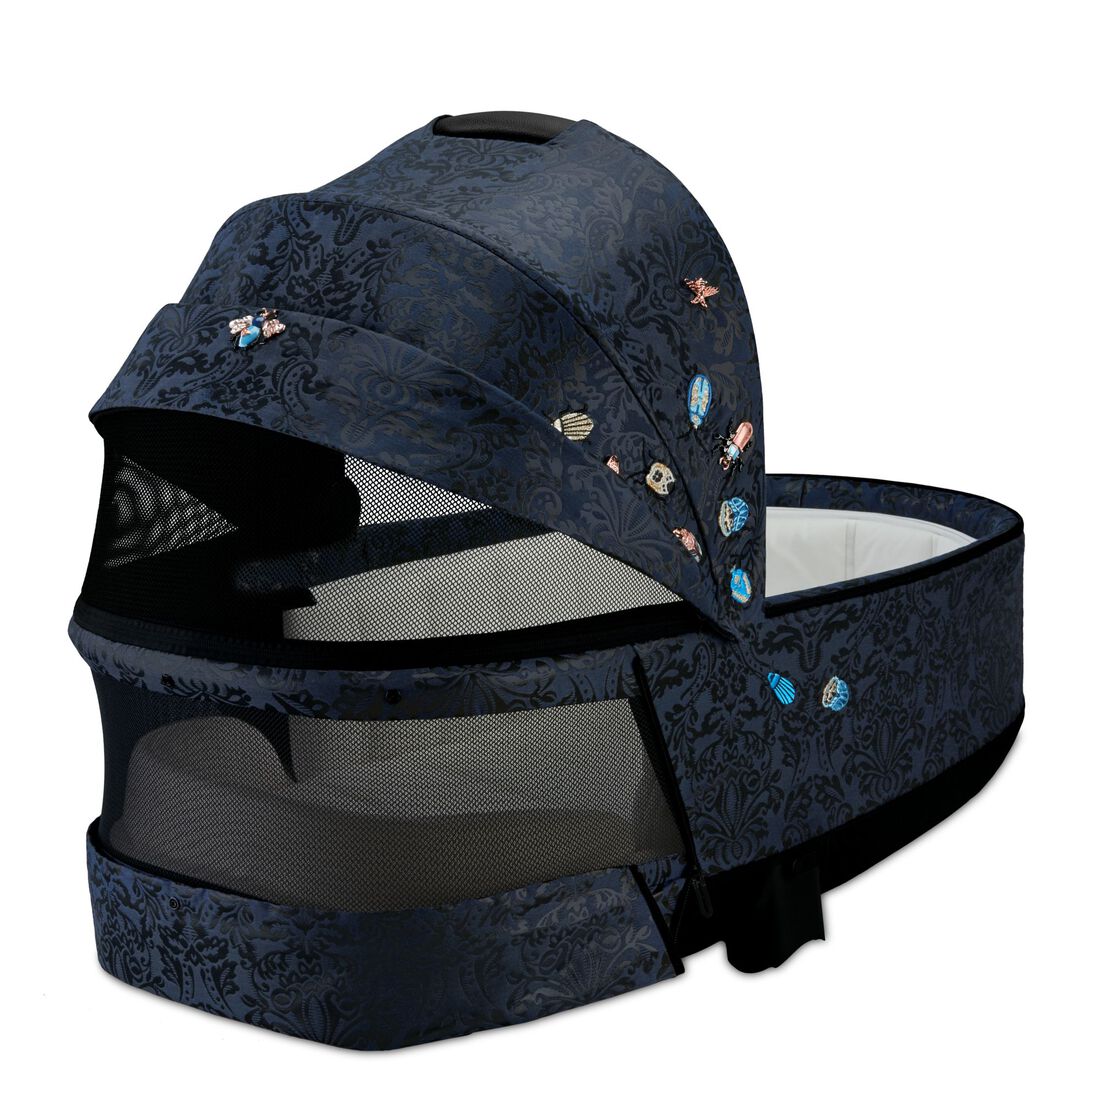 CYBEX Priam Lux Carry Cot - Jewels of Nature in Jewels of Nature large Bild 3